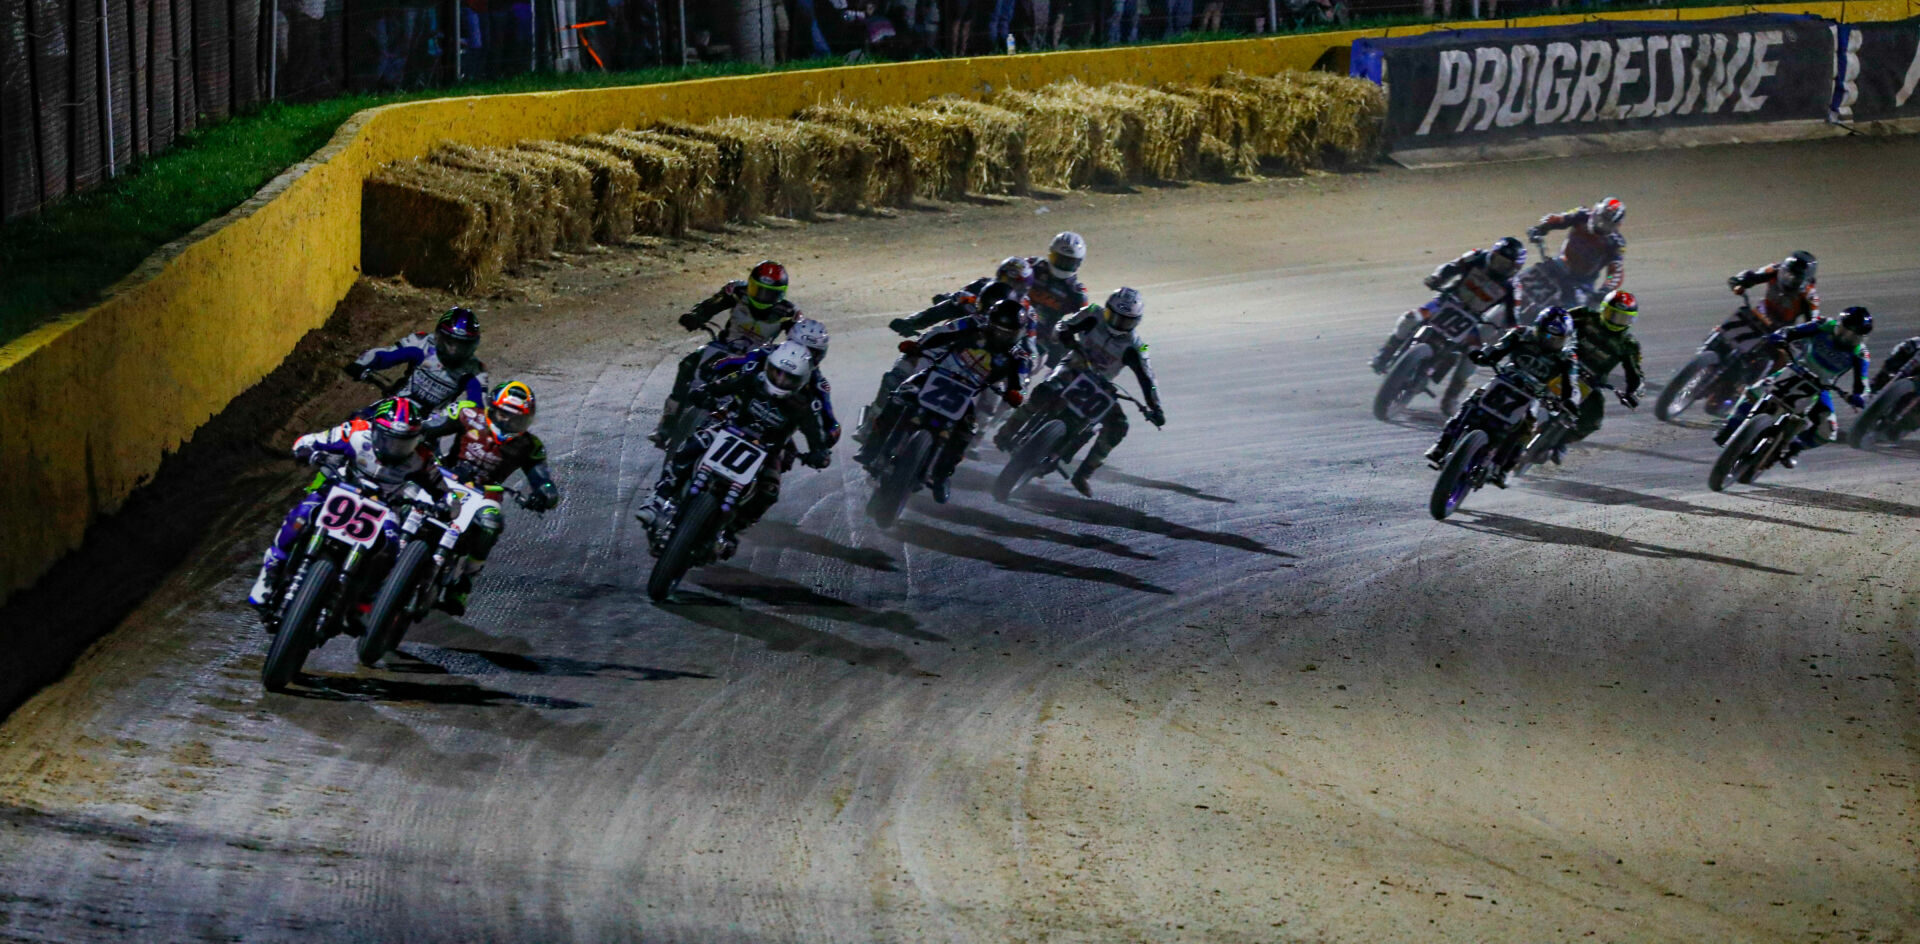 JD Beach (95) leads Jared Mees (1) and the rest of the AFT SuperTwins field at the Senoia Short Track. Photo by Scott Hunter, courtesy AFT.